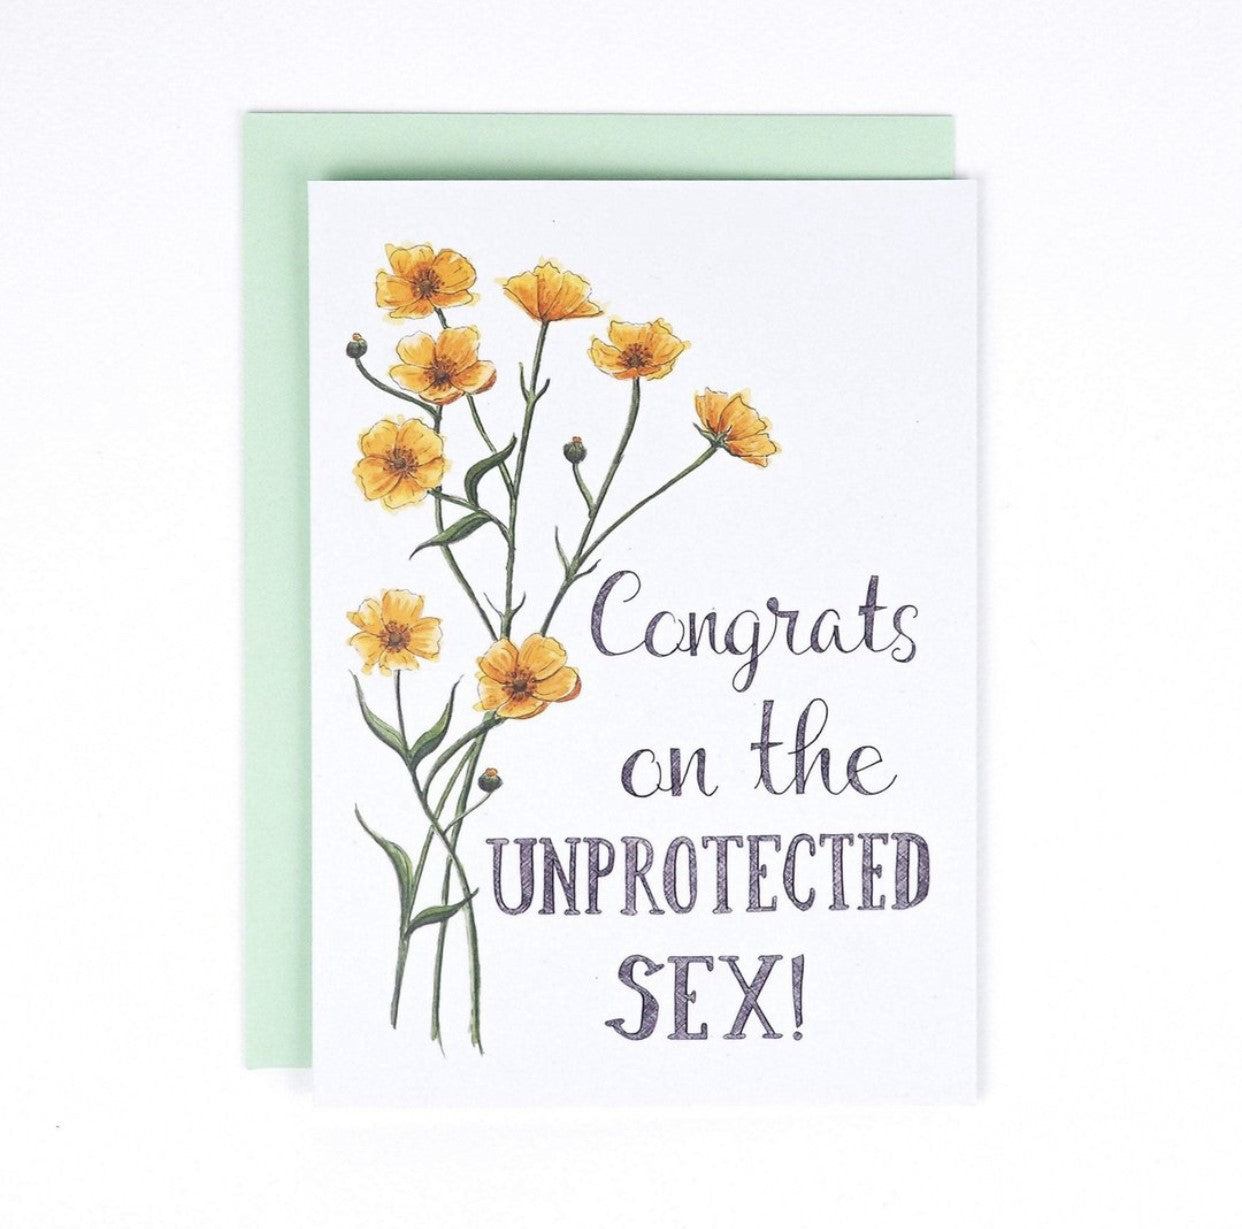 Congrats On The Unprotected Sex! Card